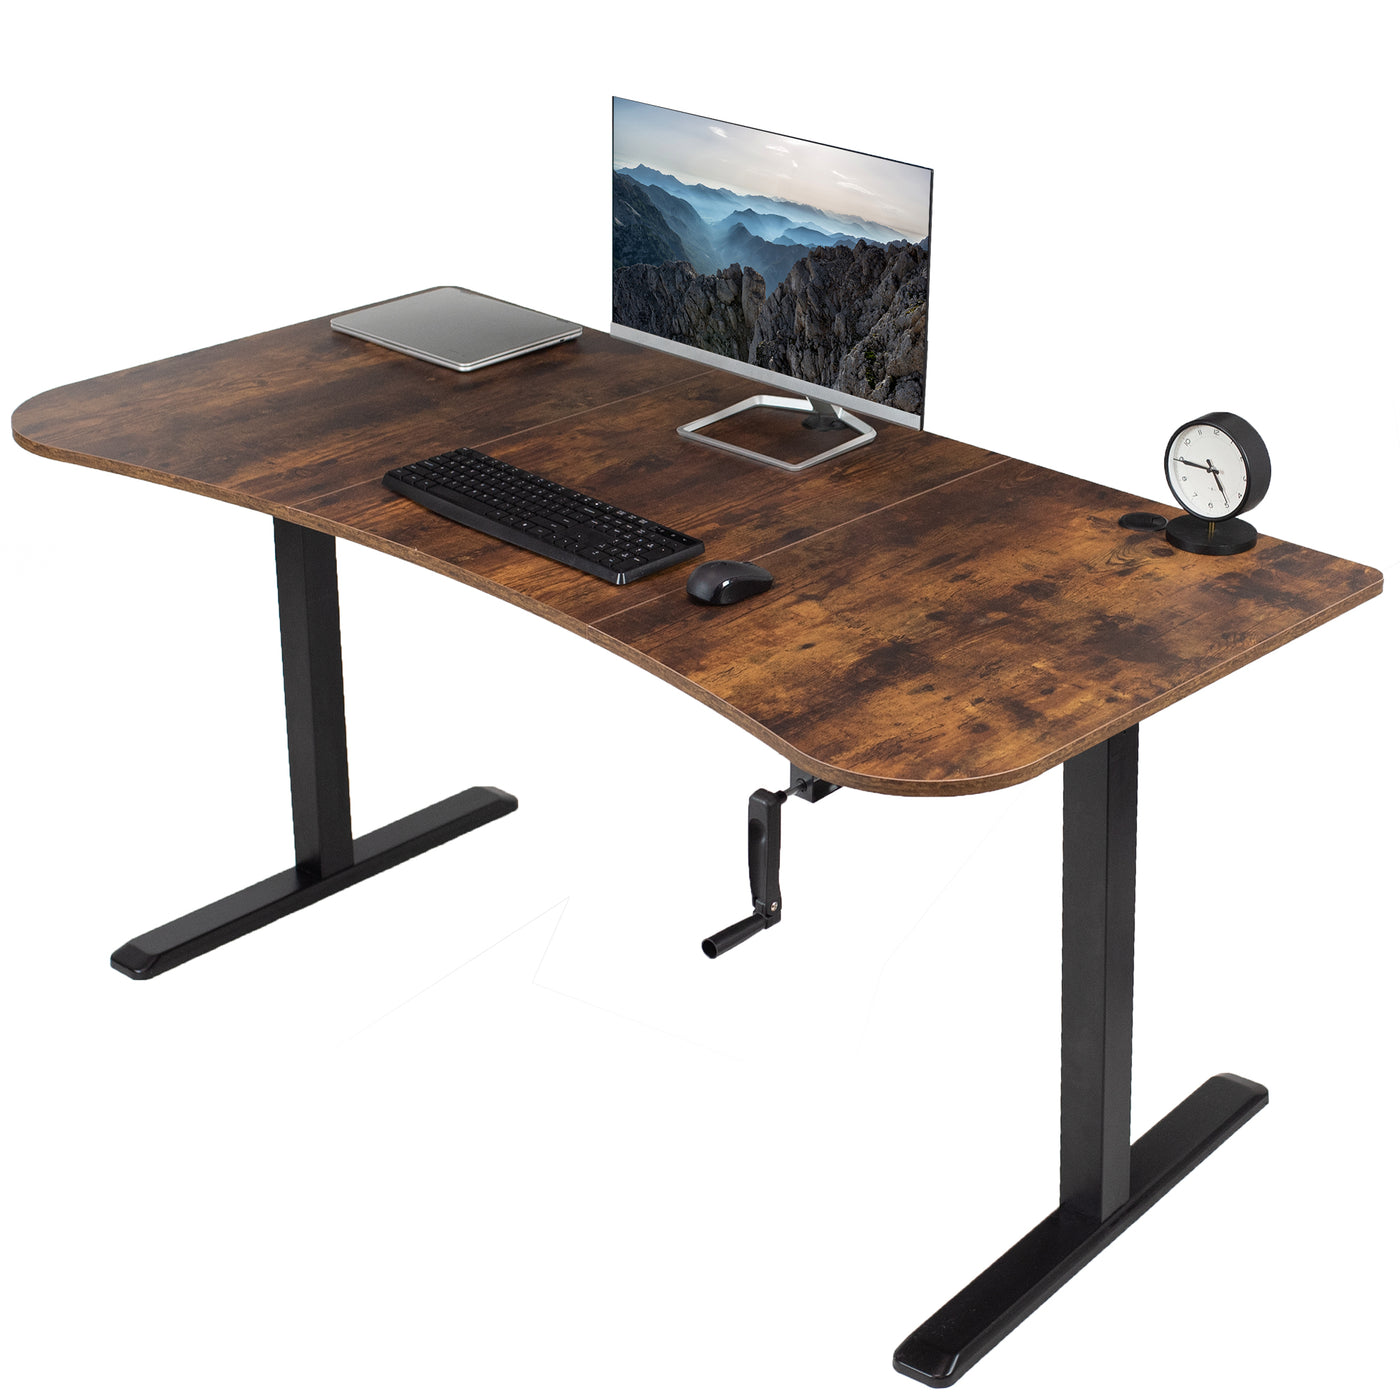 32 x 24 Inches Height Adjustable Desk with Hand Crank Adjusting